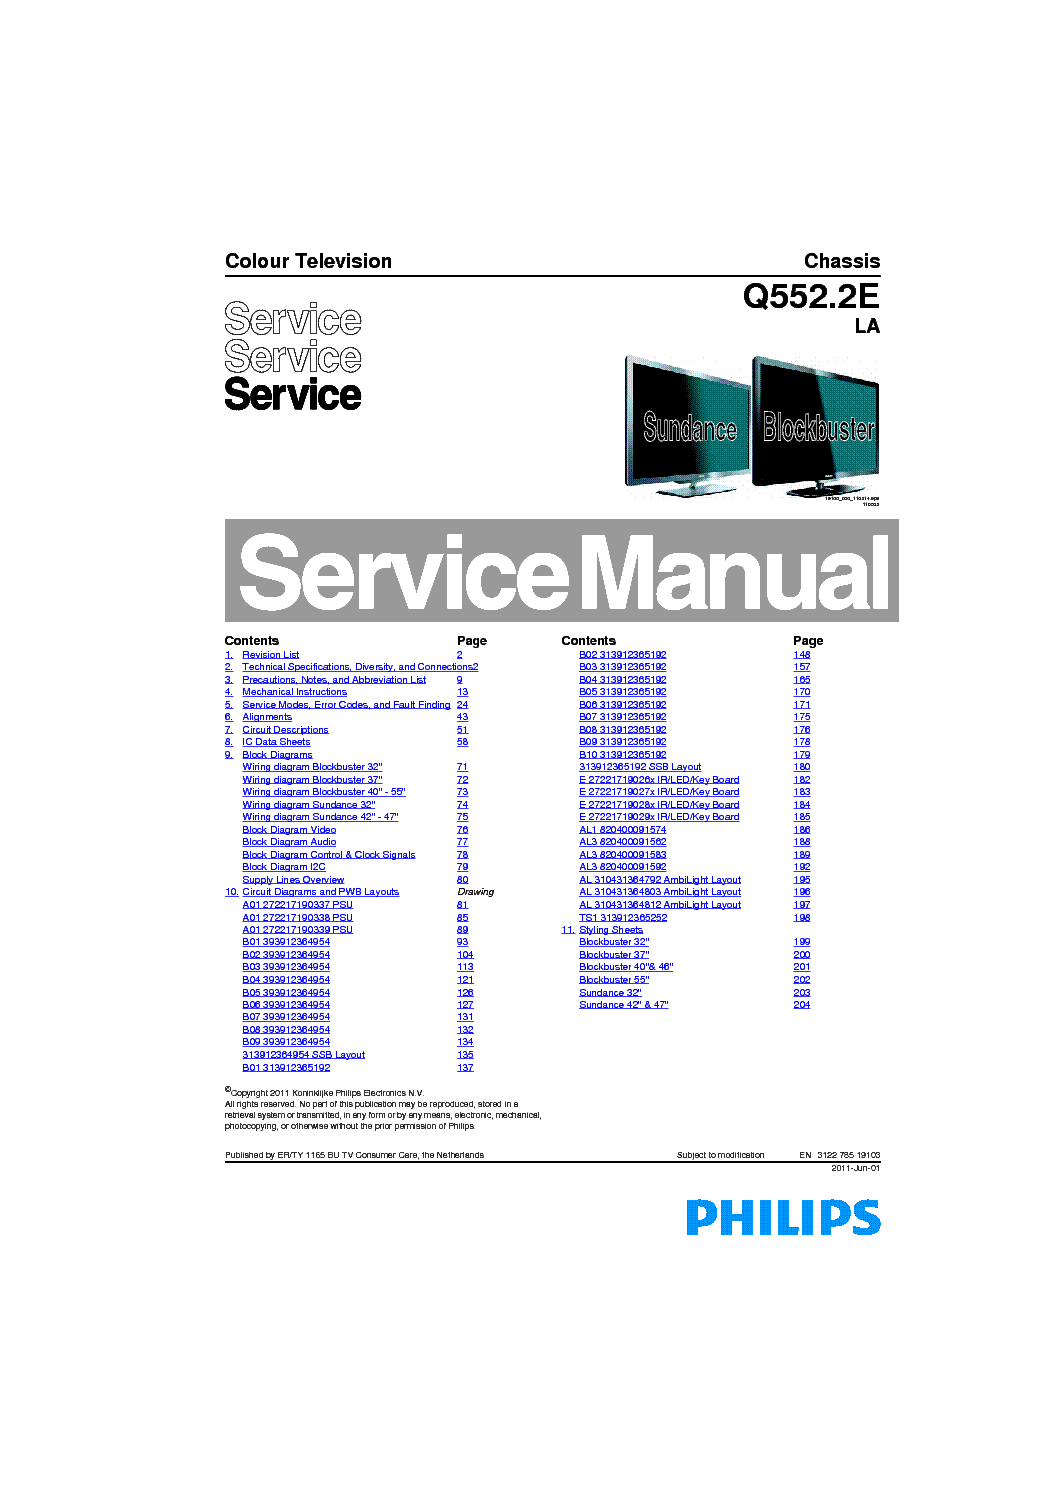 PHILIPS Q552.2ELA 312278519103 service manual (1st page)